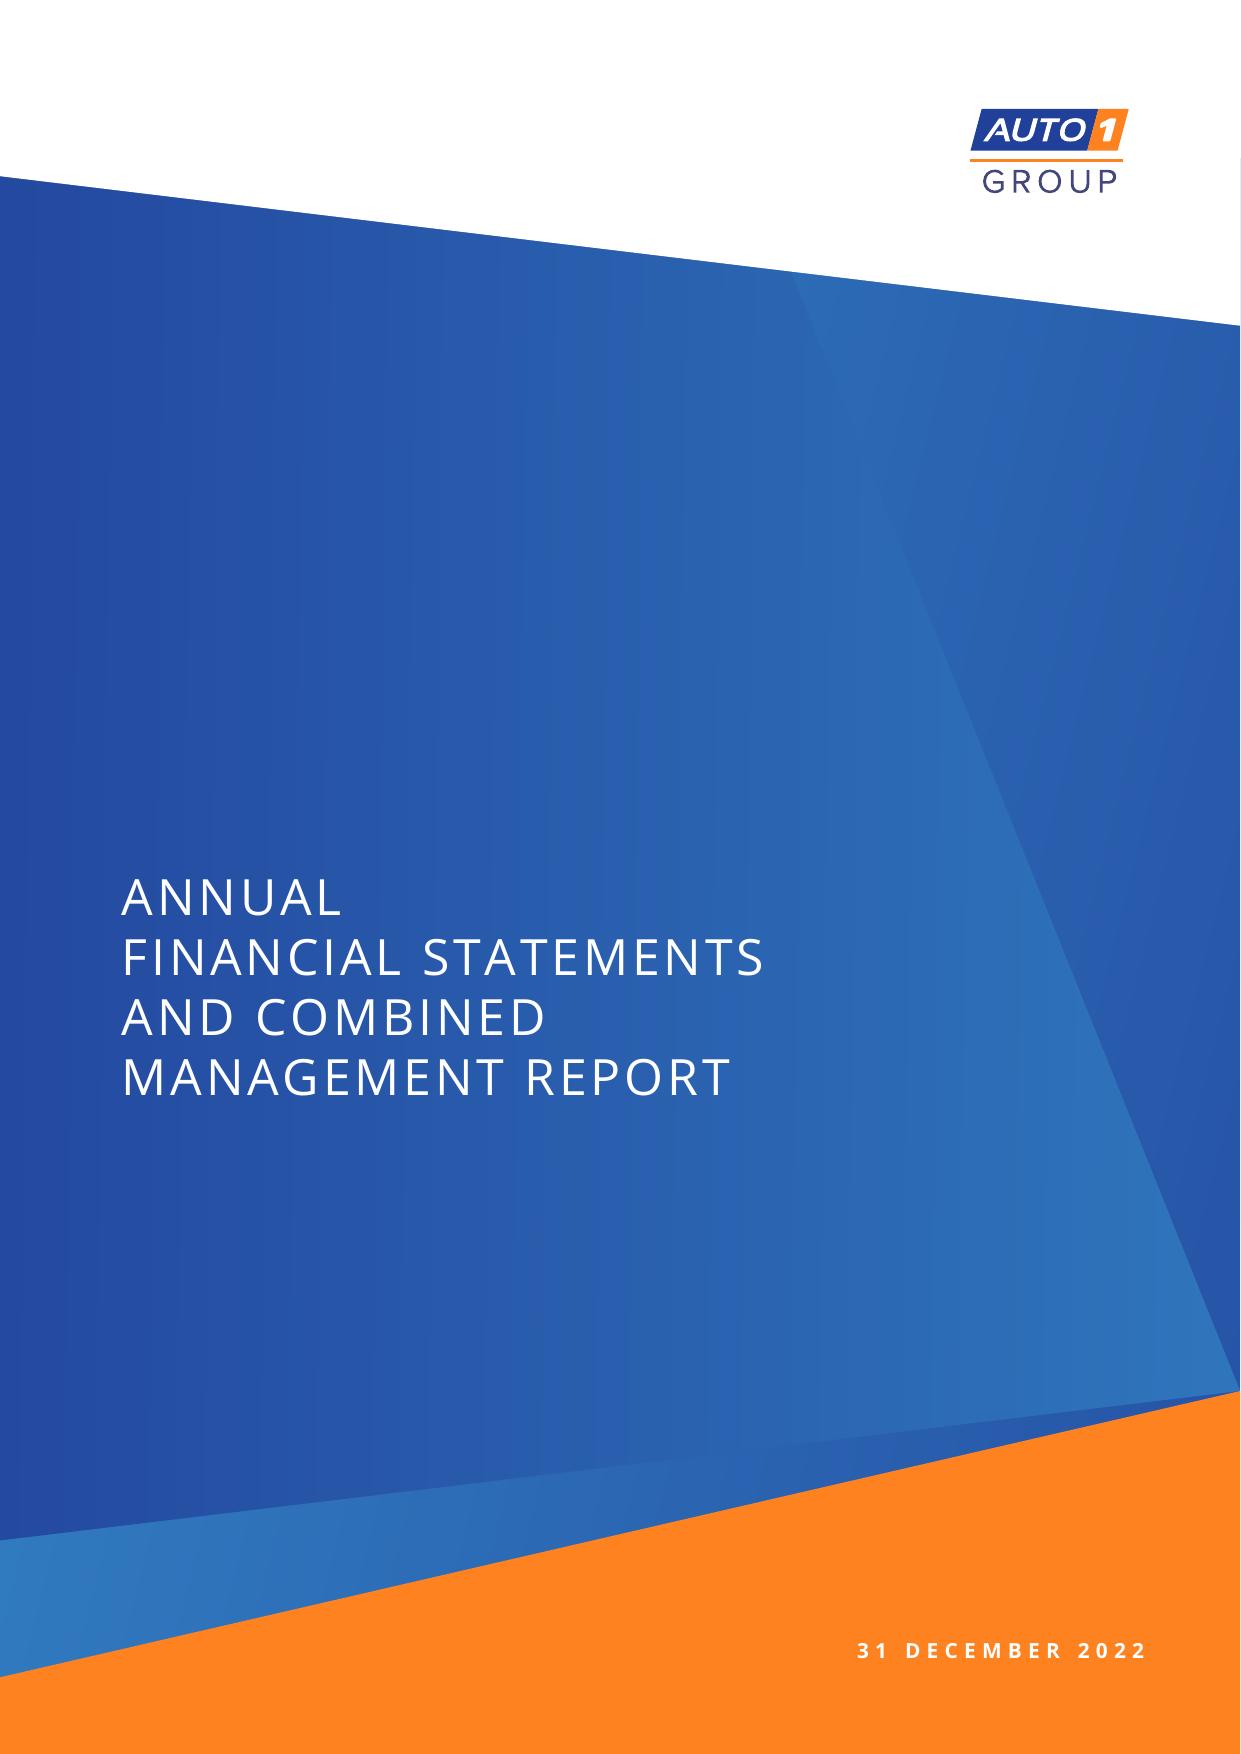 AUTO1-GROUP 2022 Annual Report